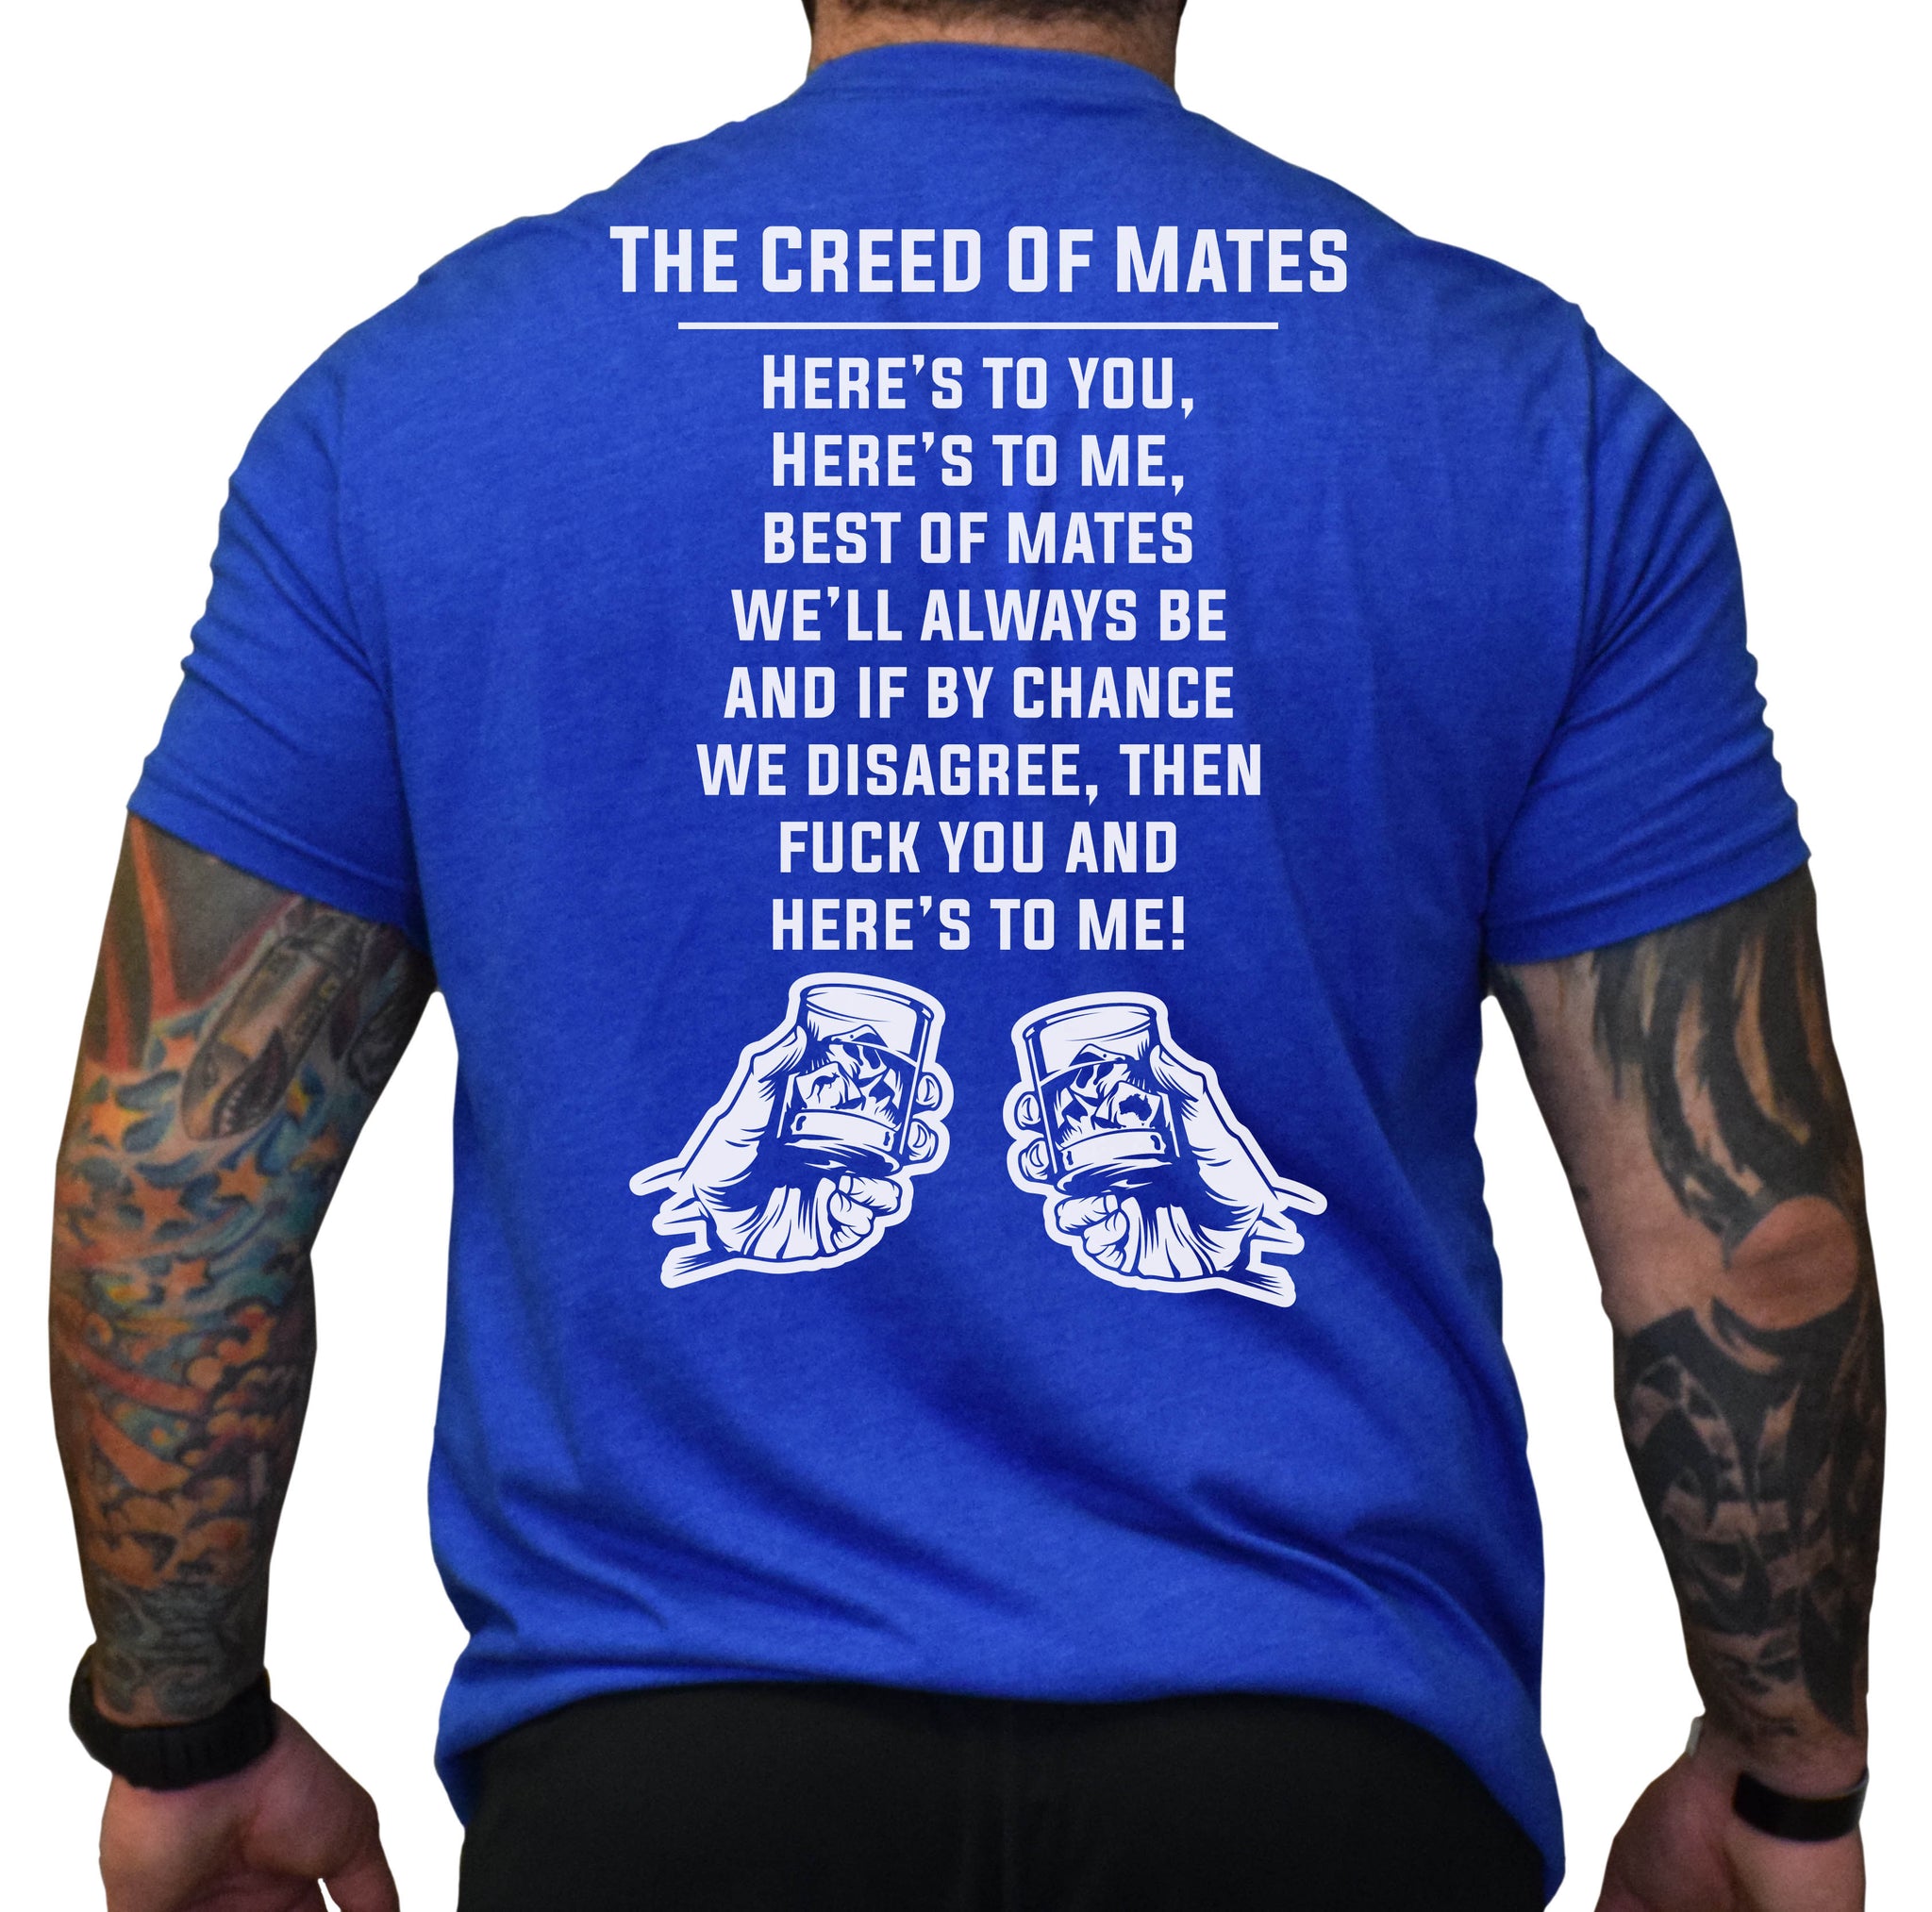 The Creed of Mates